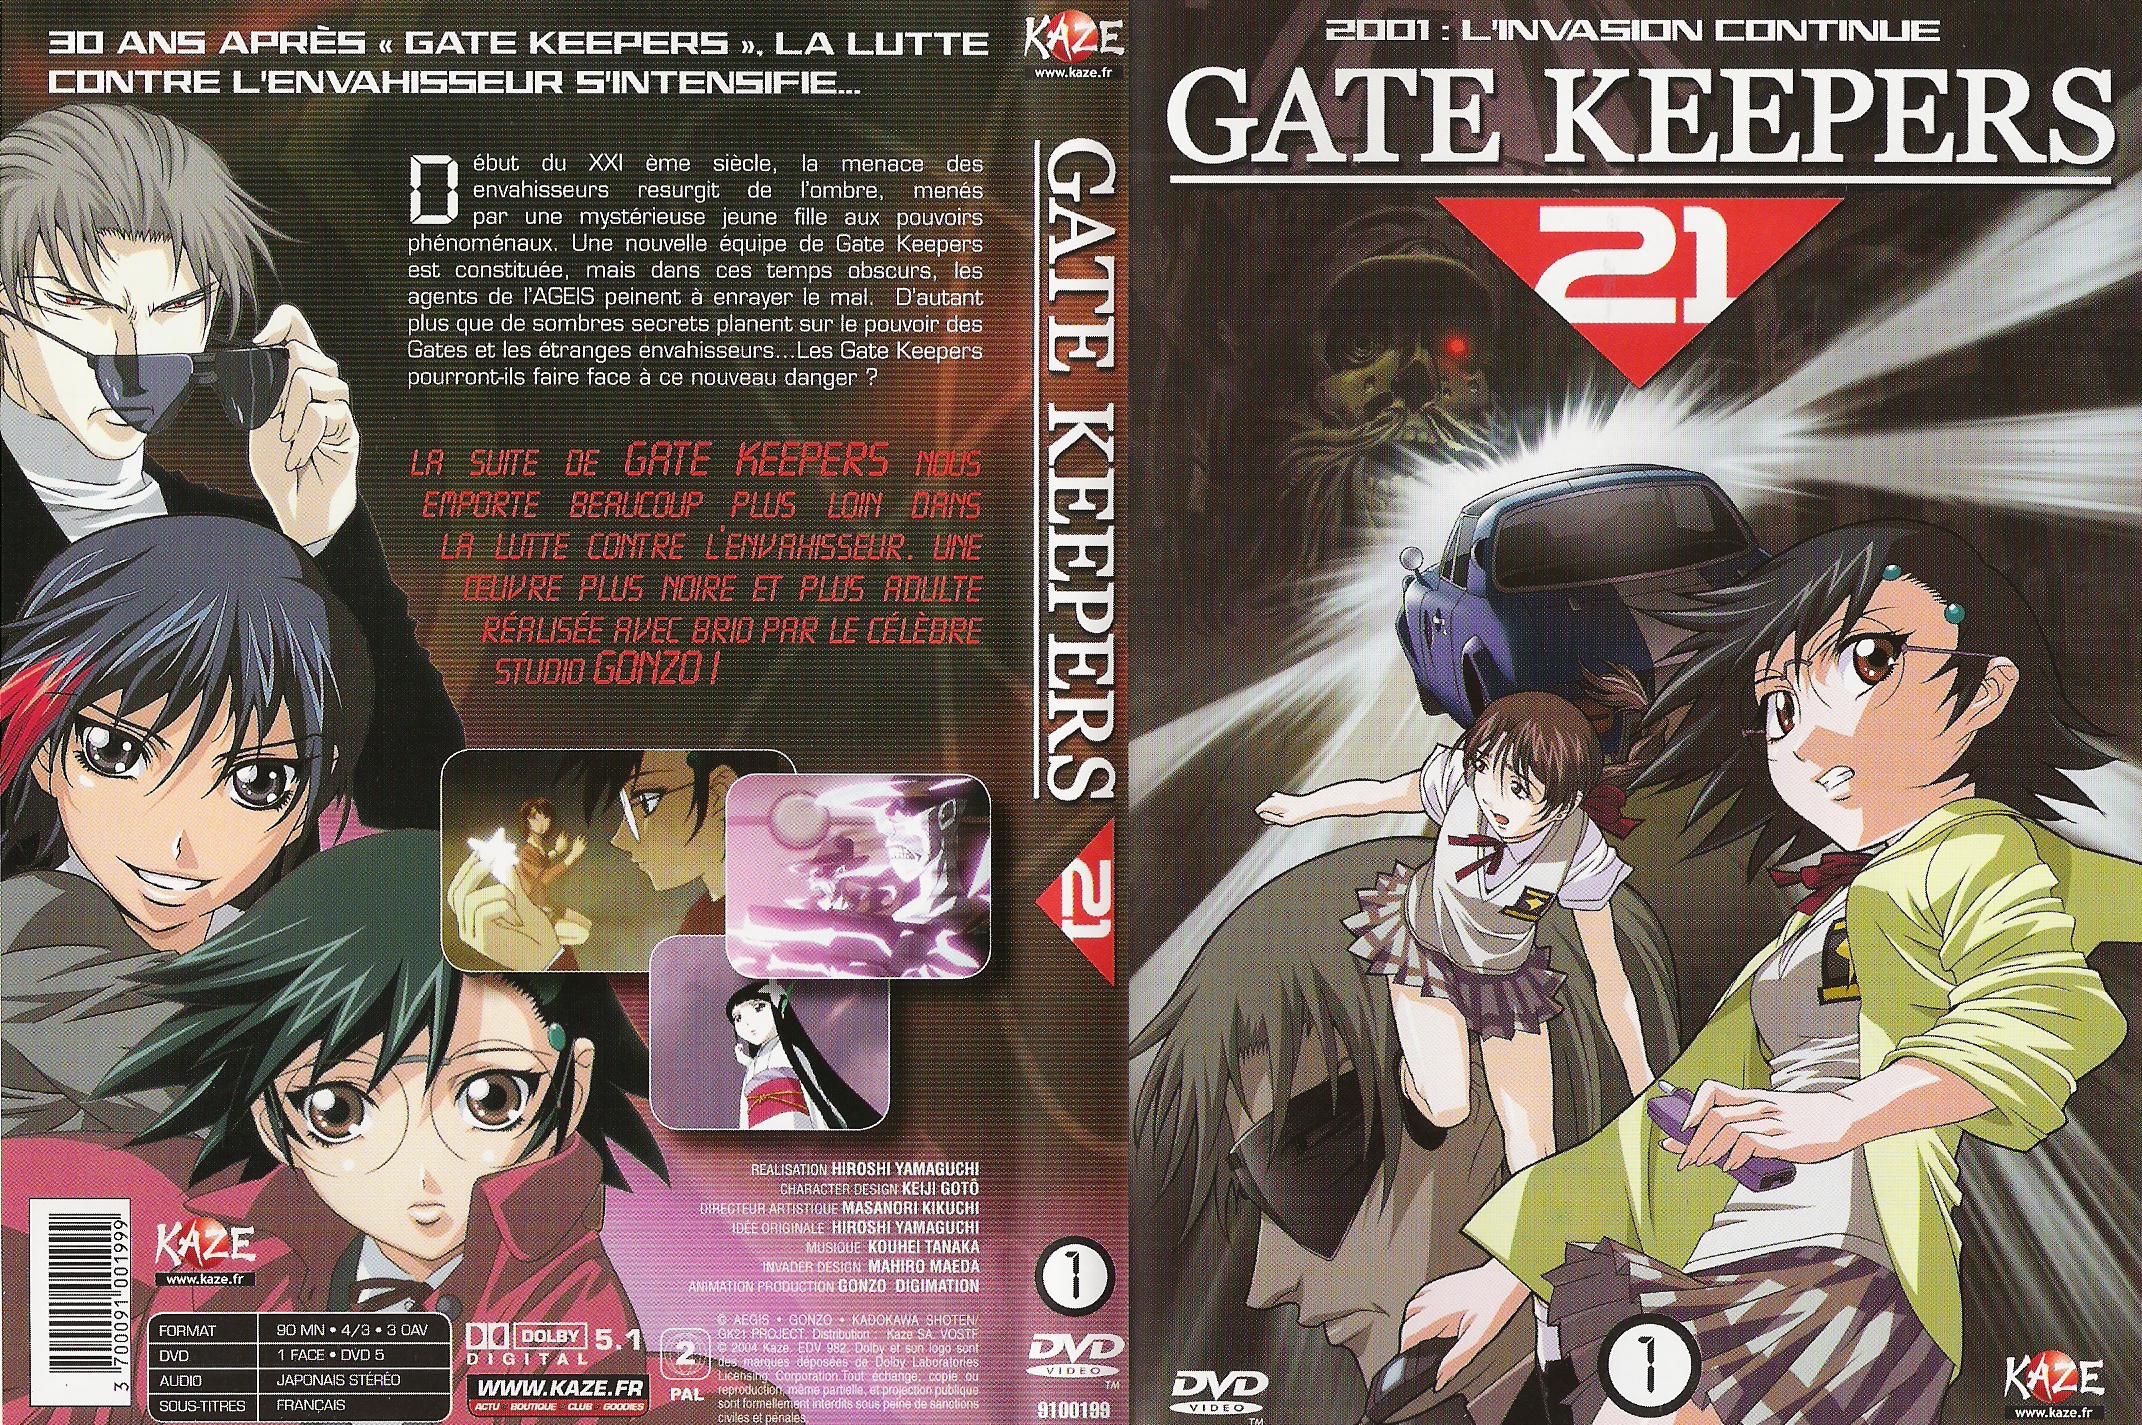 Jaquette DVD Gate Keepers 21 DVD 1 v2